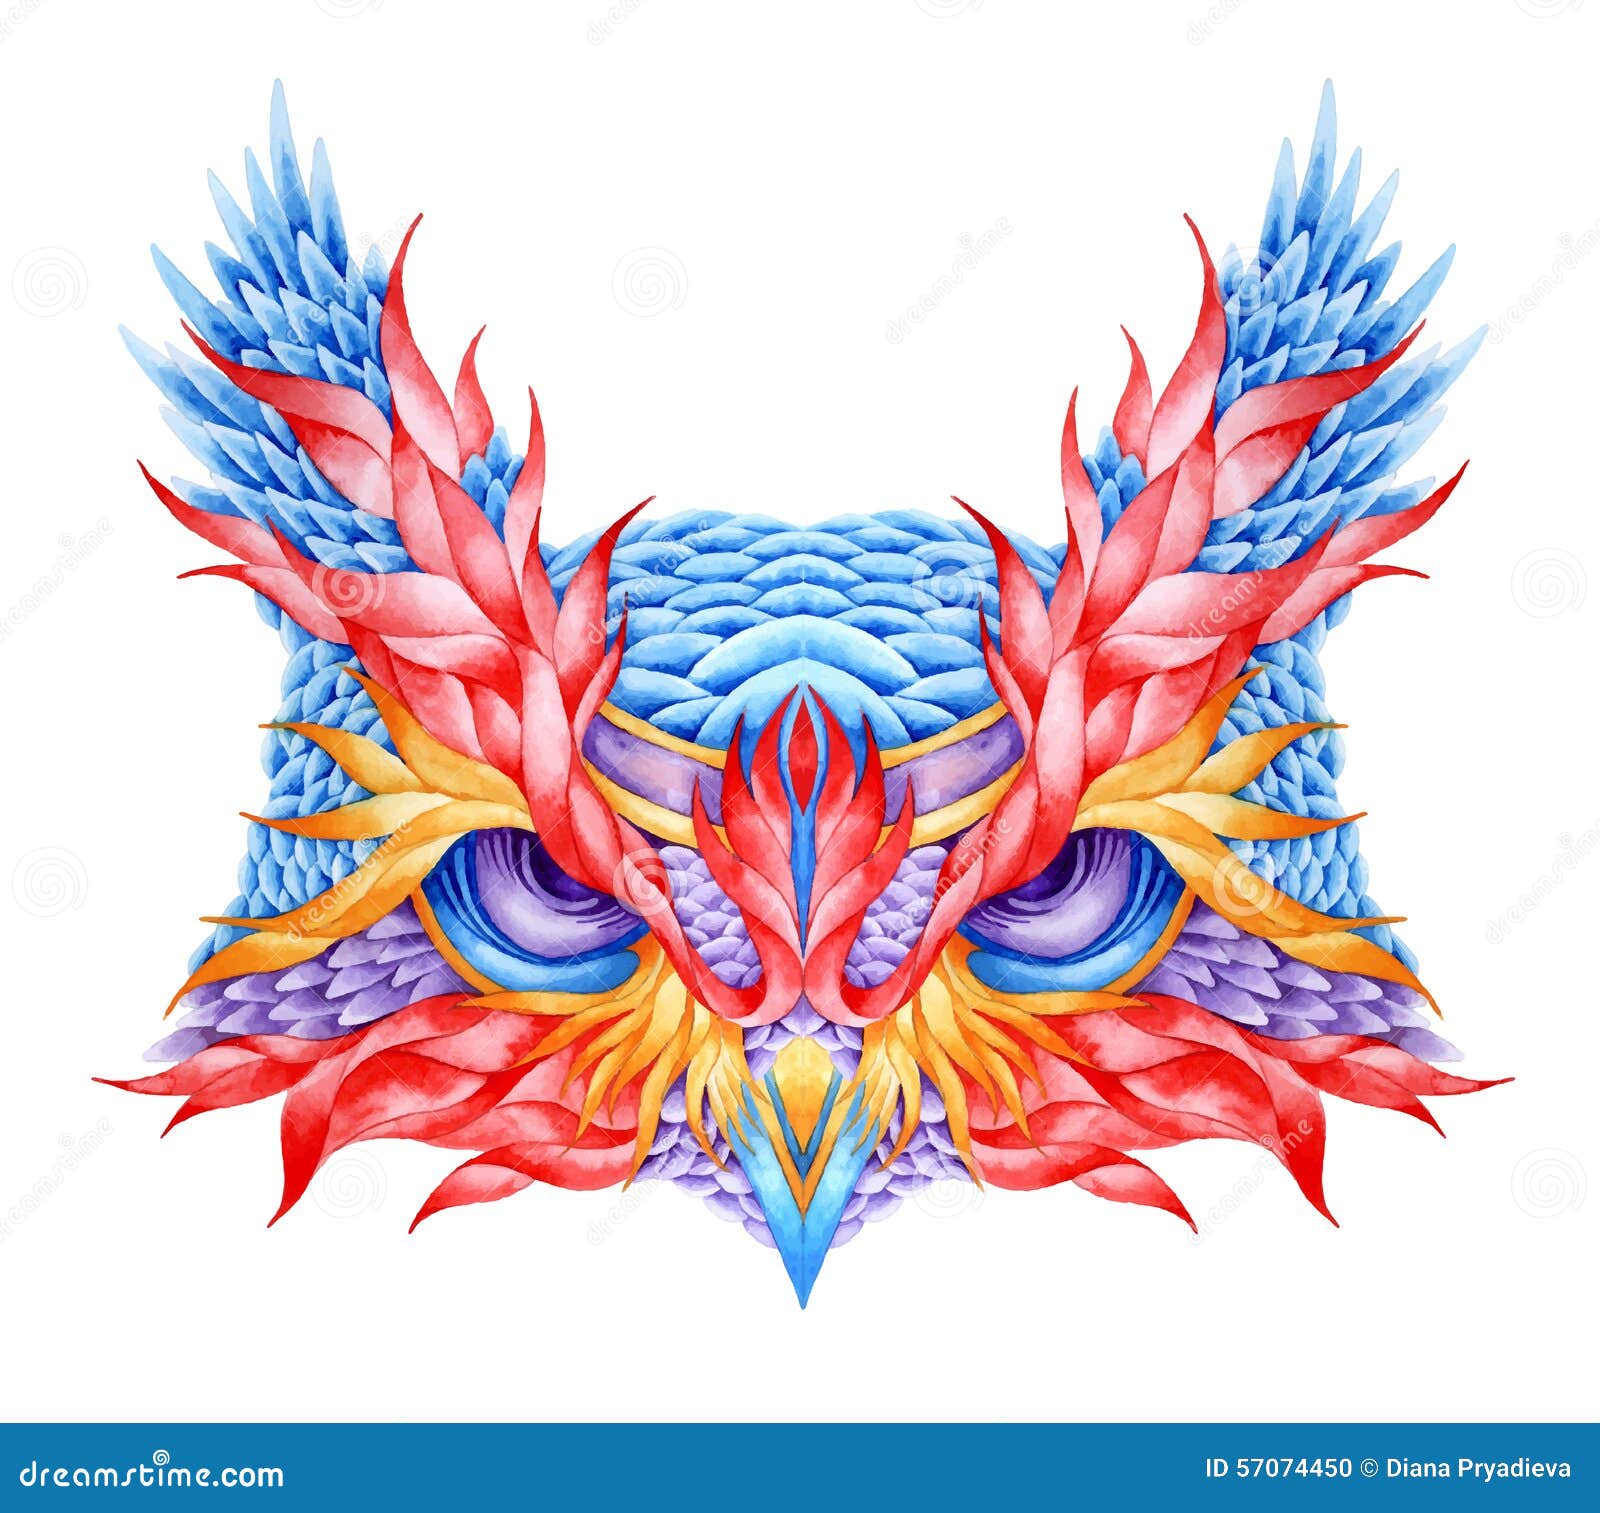 Cute Abstract Owl And Psychedelic Ornate Pattern Character Tattoo Design  For Pet Lovers Artwork For Print Textiles Detailed Vector Illustration  Totem Animal Royalty Free SVG Cliparts Vectors And Stock Illustration  Image 137886824